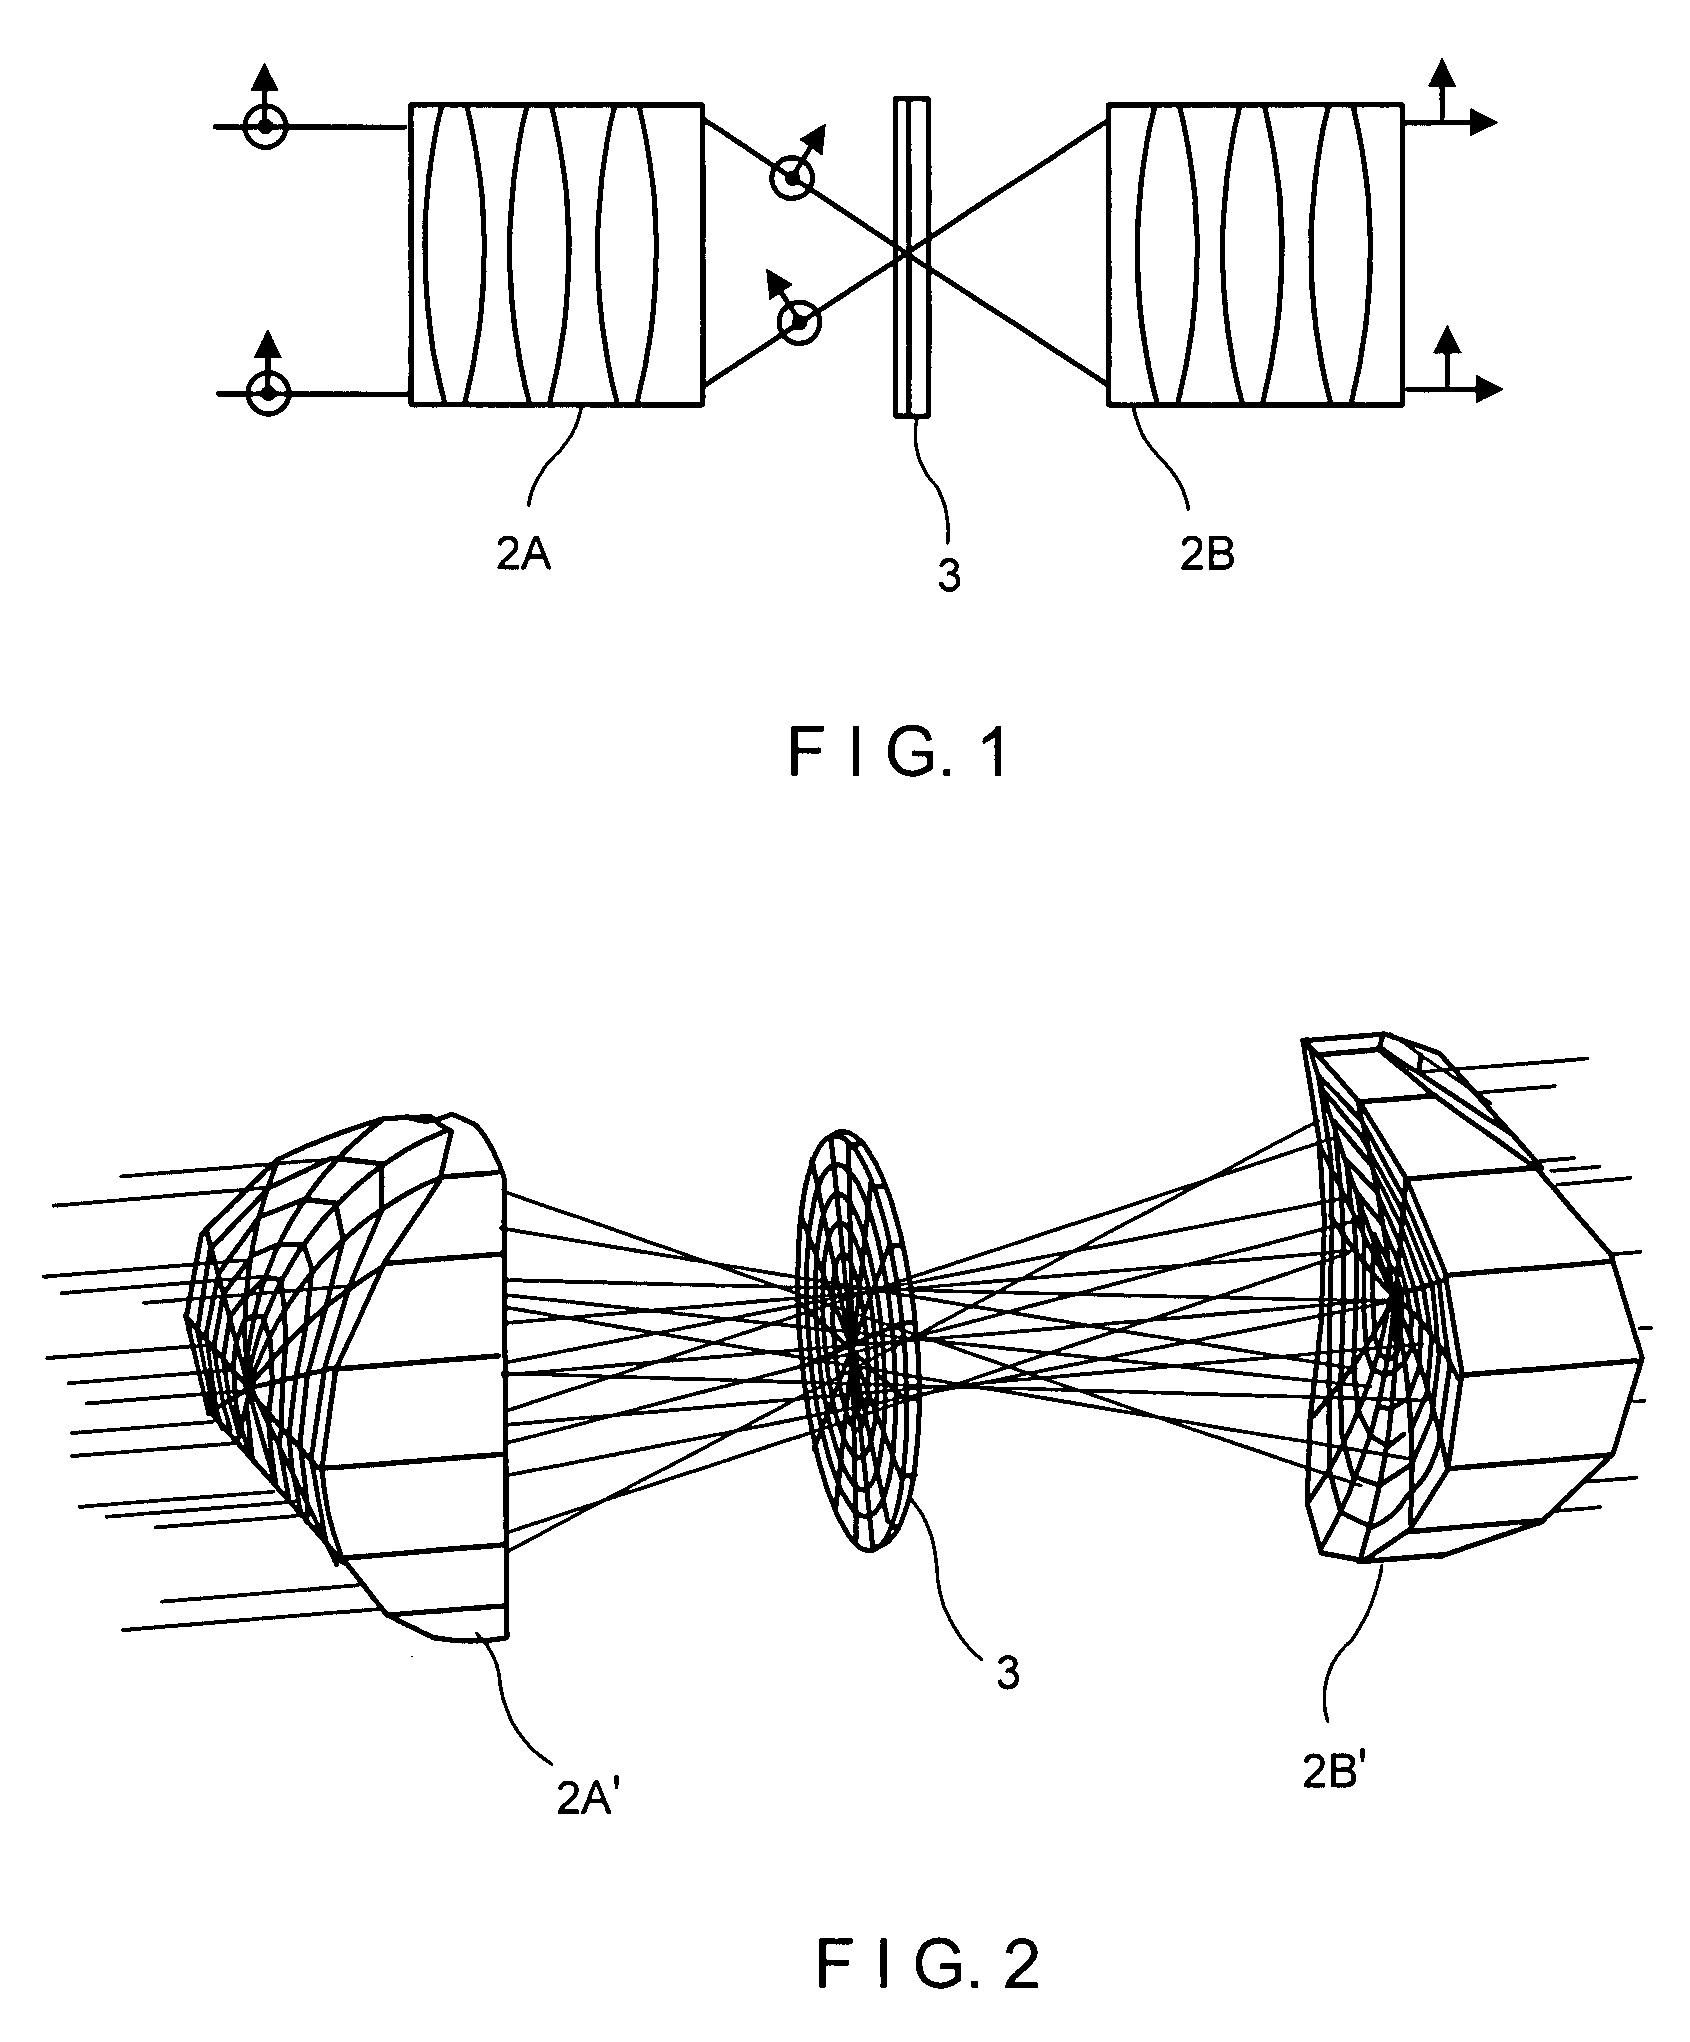 Microscope imaging system and method for emulating a high aperture imaging system, particularly for mask inspection